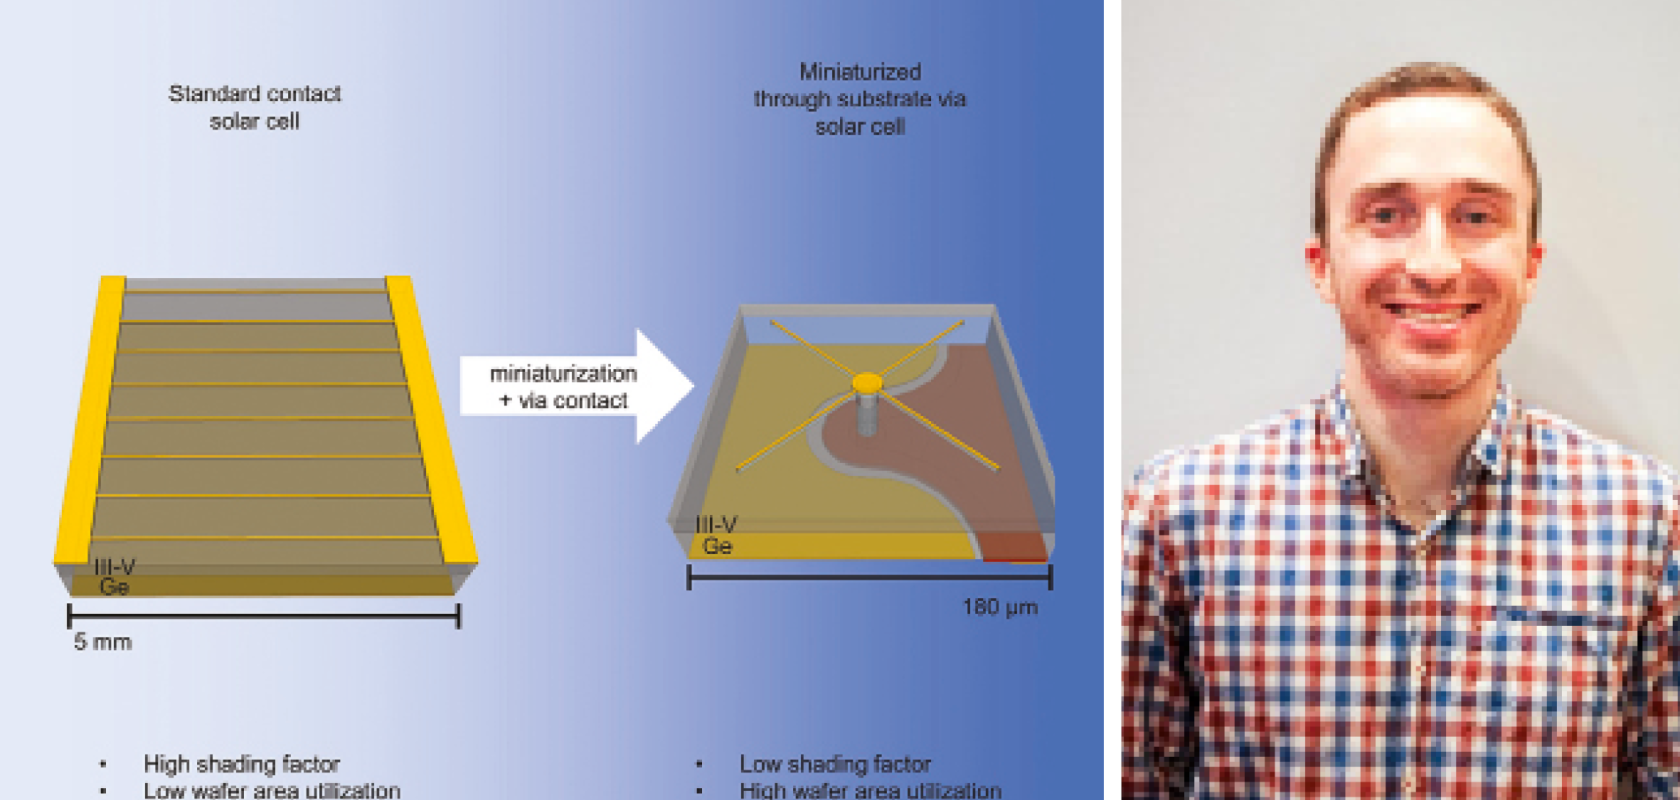 Left: A graphic showing the difference between a standard solar cell and a miniaturised solar cell. Right: the University of Ottawa’s Mathieu de Lafontaine 